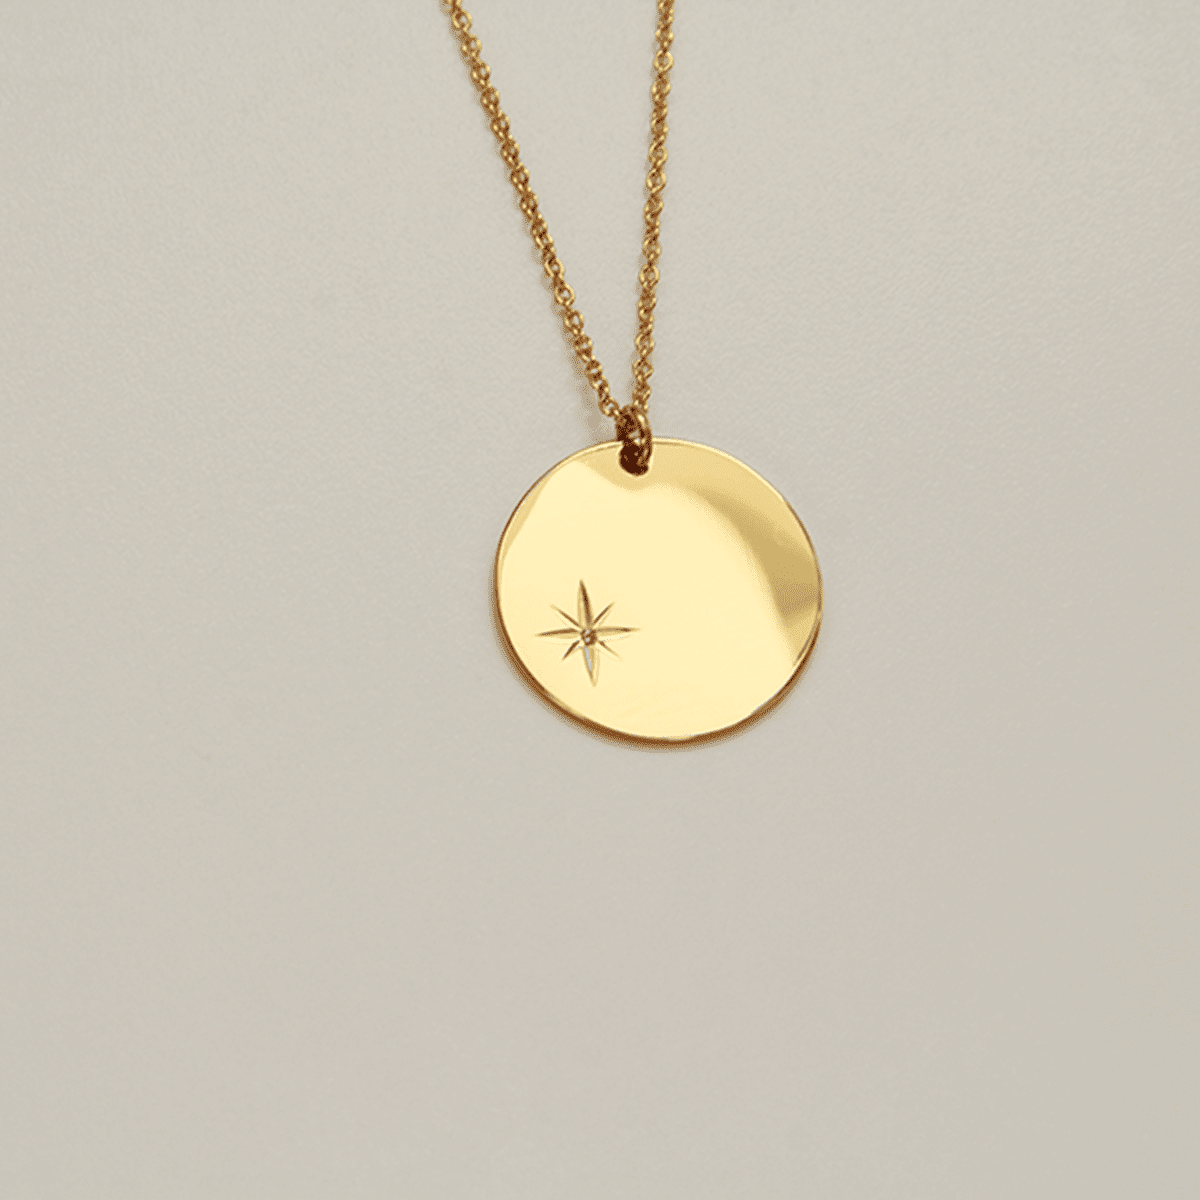 18k Gold-Plated Pendant With Big Polar Star Medal - Tanzire Store